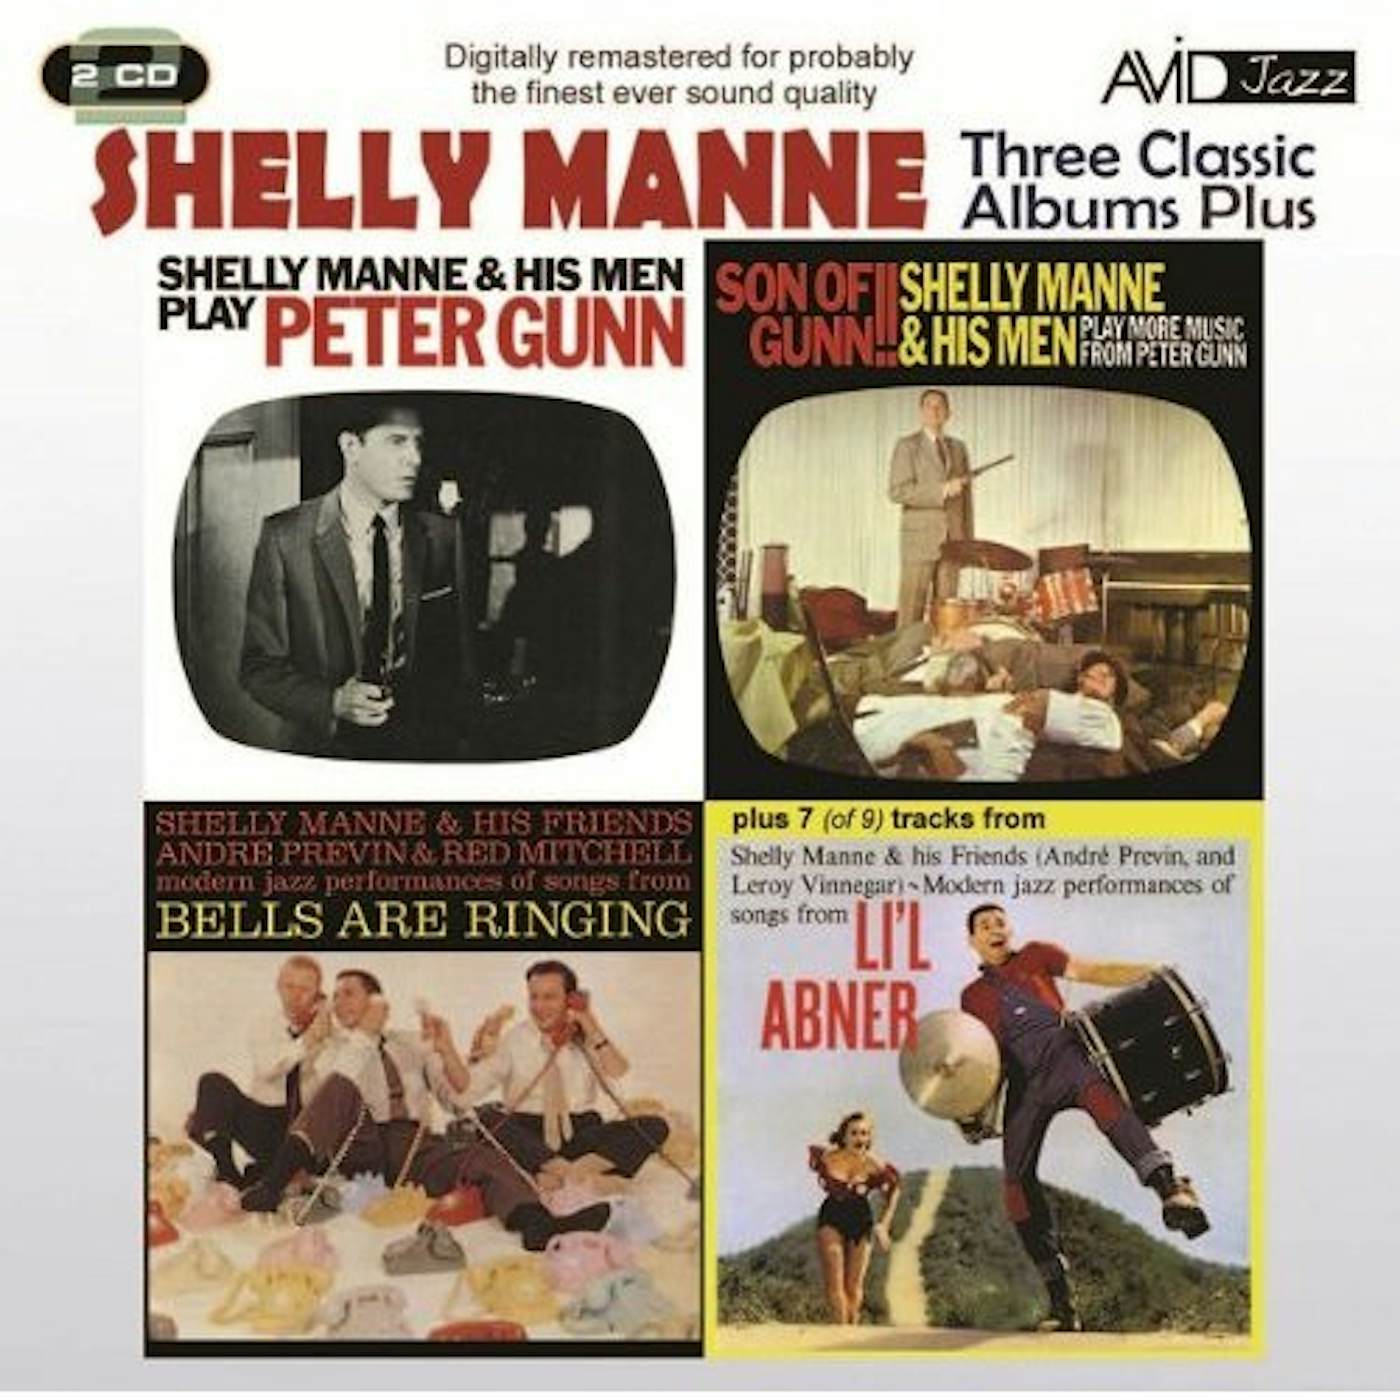 Shelly Manne & His Men THREE CLASSIC ALBUMS PLUS CD